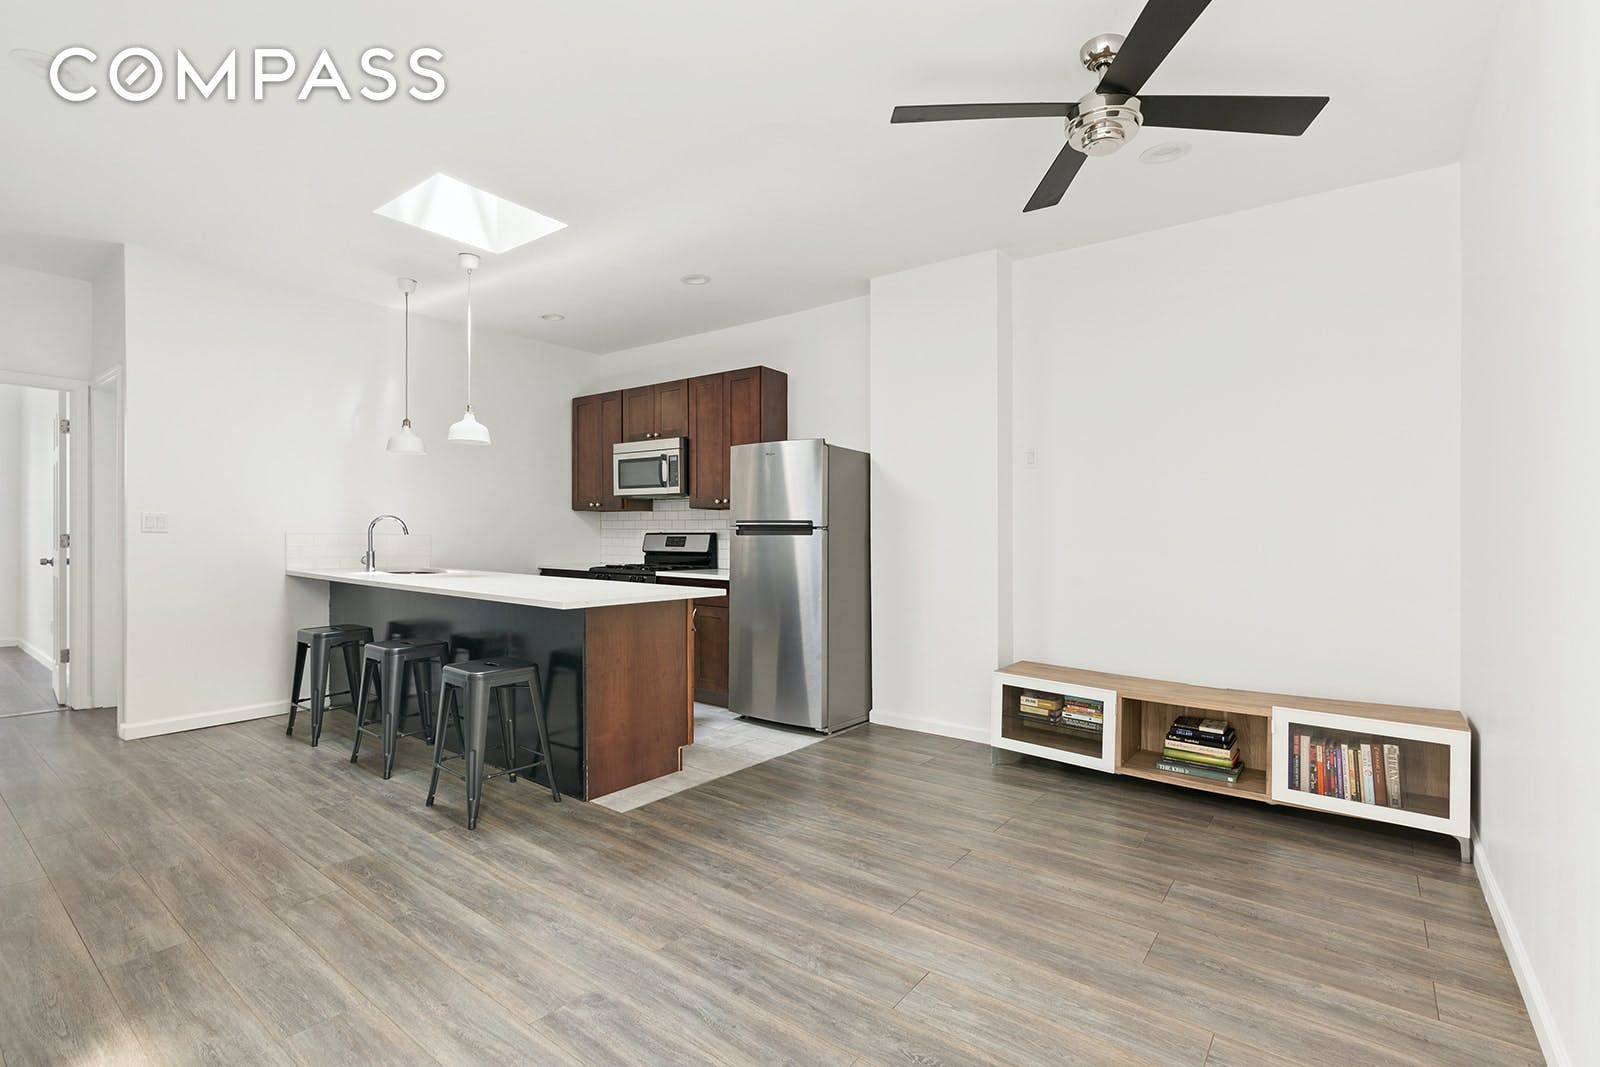 NO FEE 1161 Halsey Street Unit 2 is a freshly renovated, spacious four bedroom apartment in the heart of Bushwick.